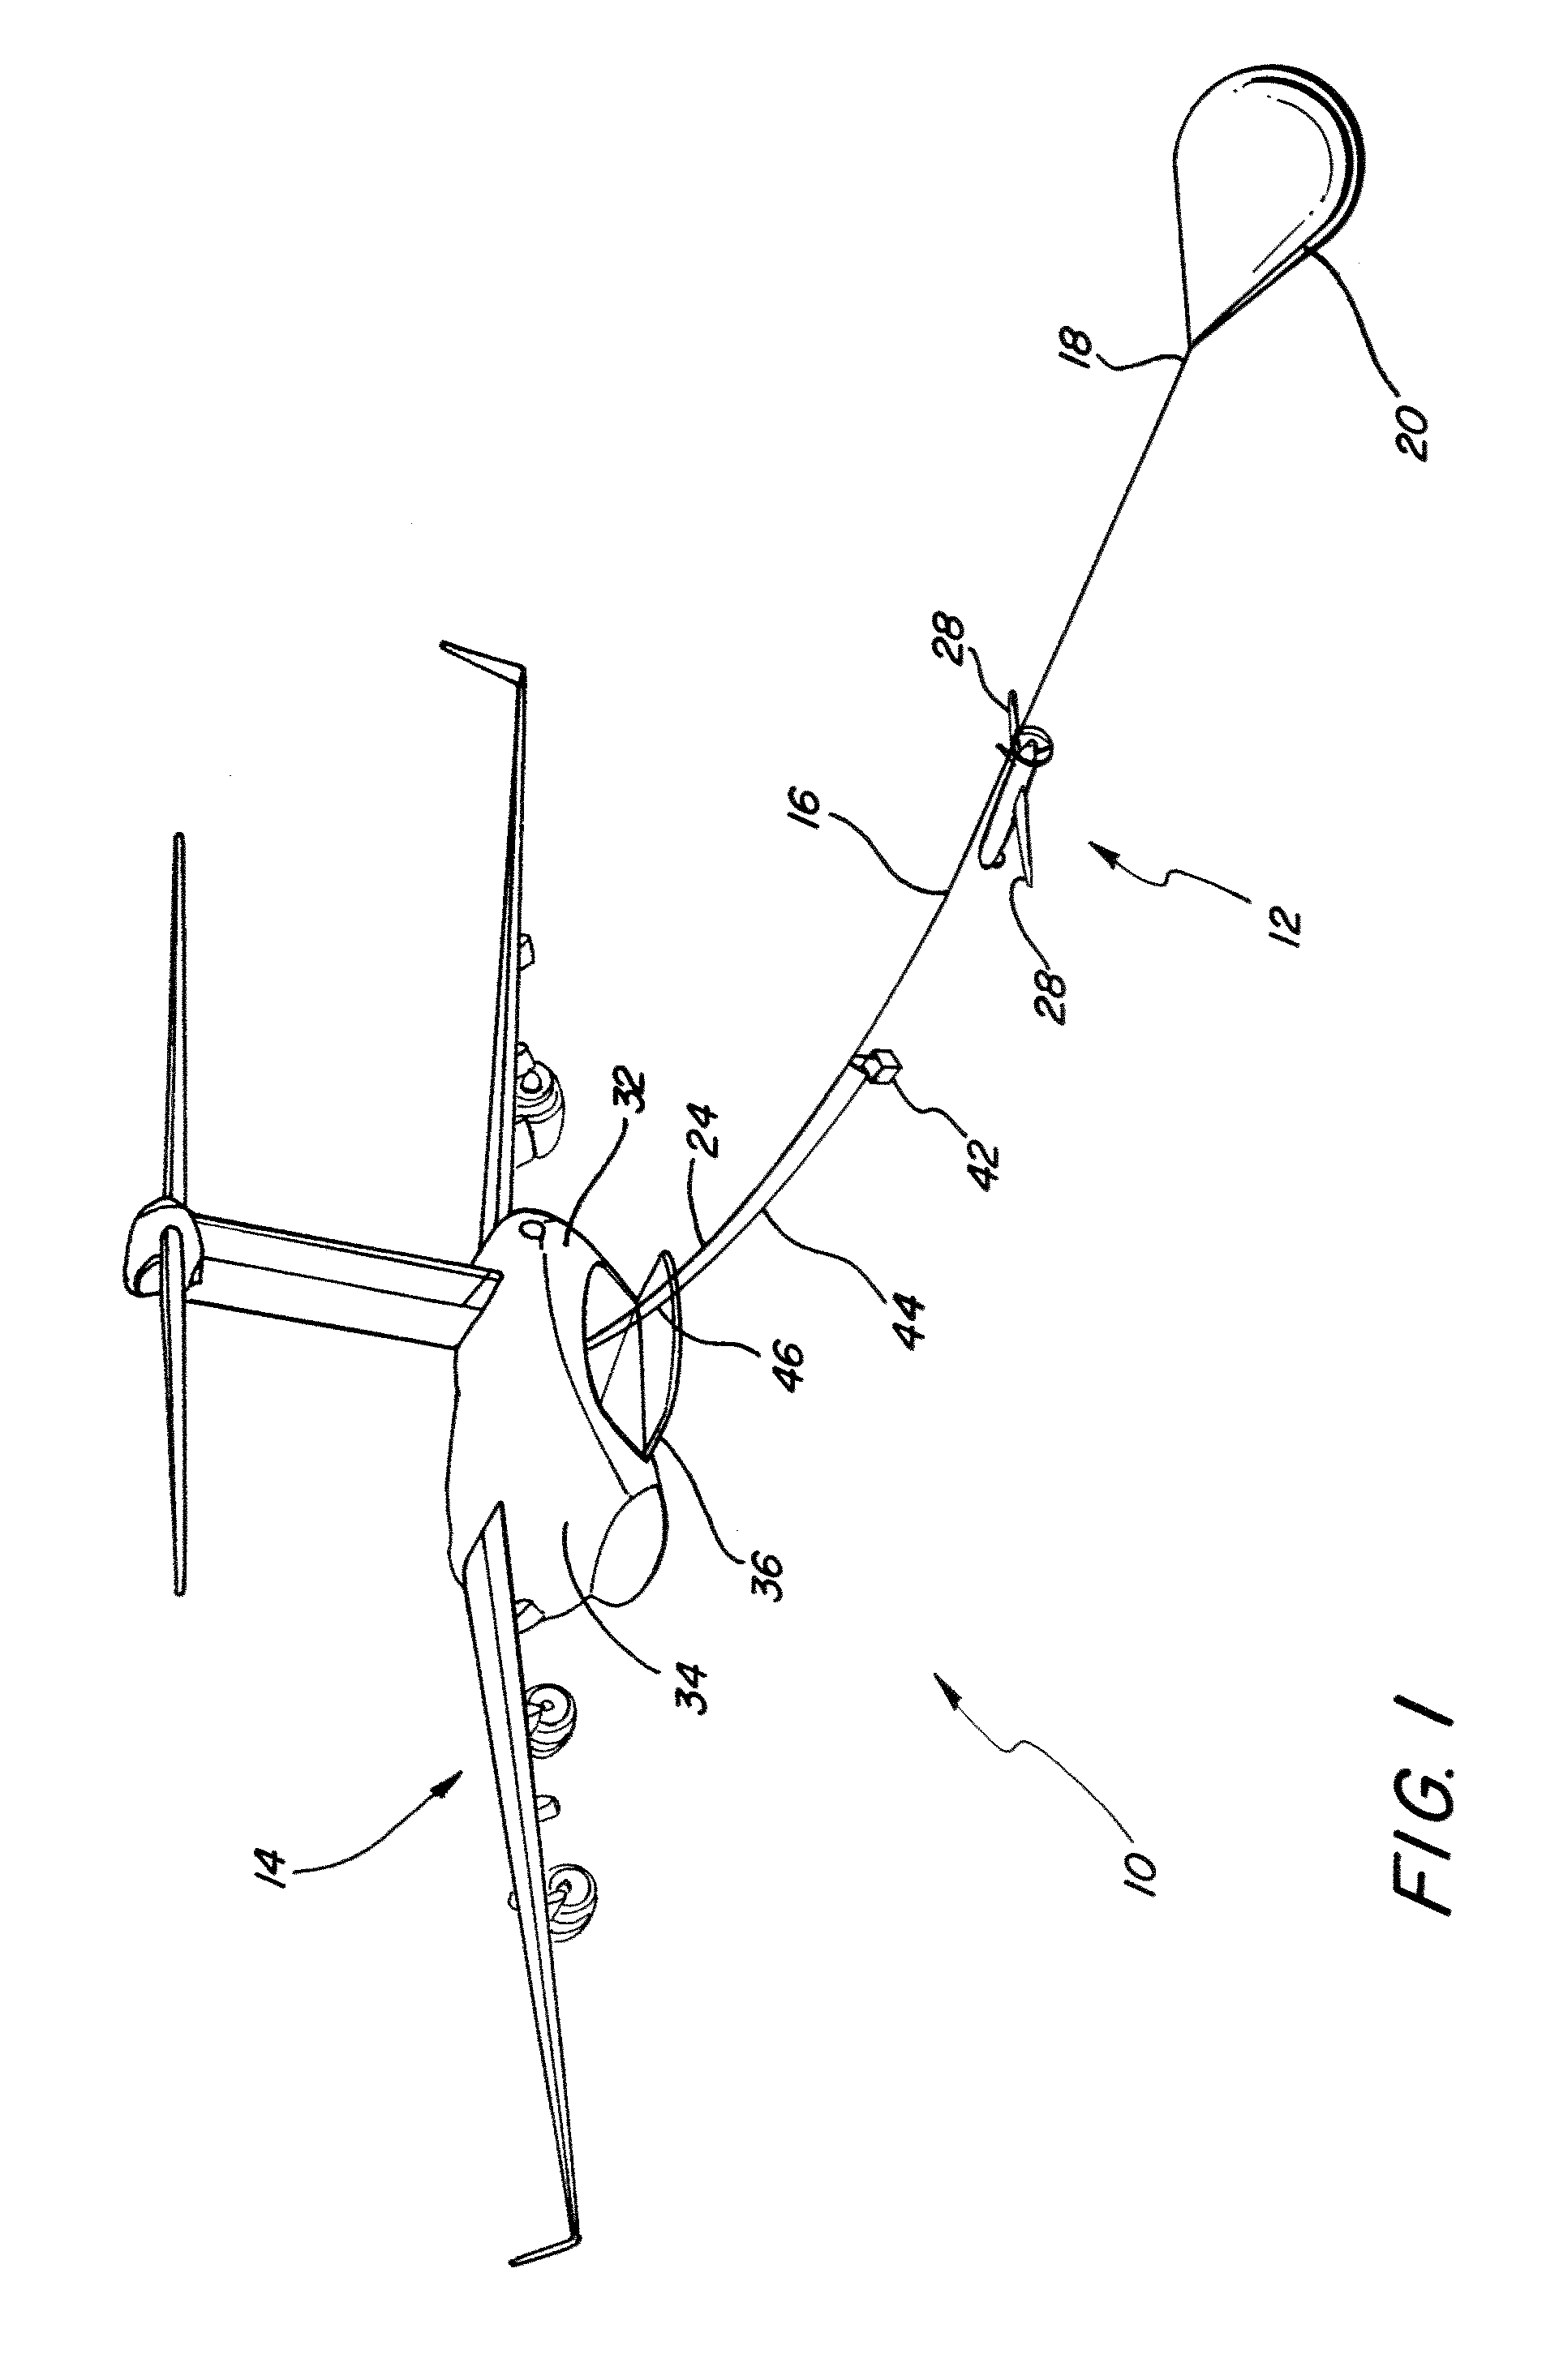 System and methods for airborne launch and recovery of aircraft